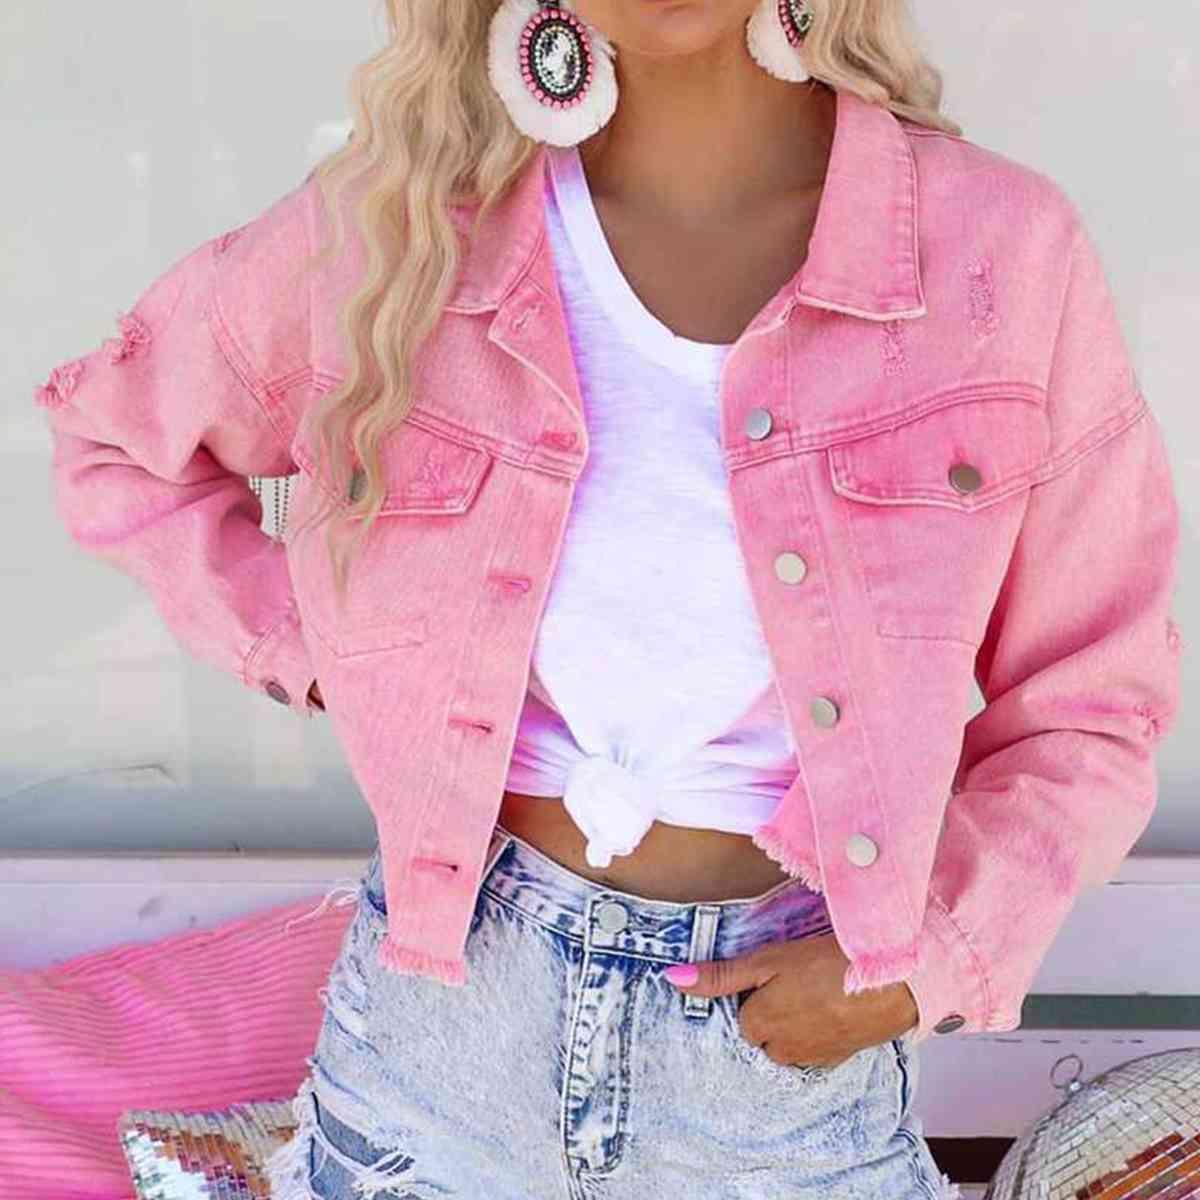 a woman wearing a pink jean jacket and denim shorts